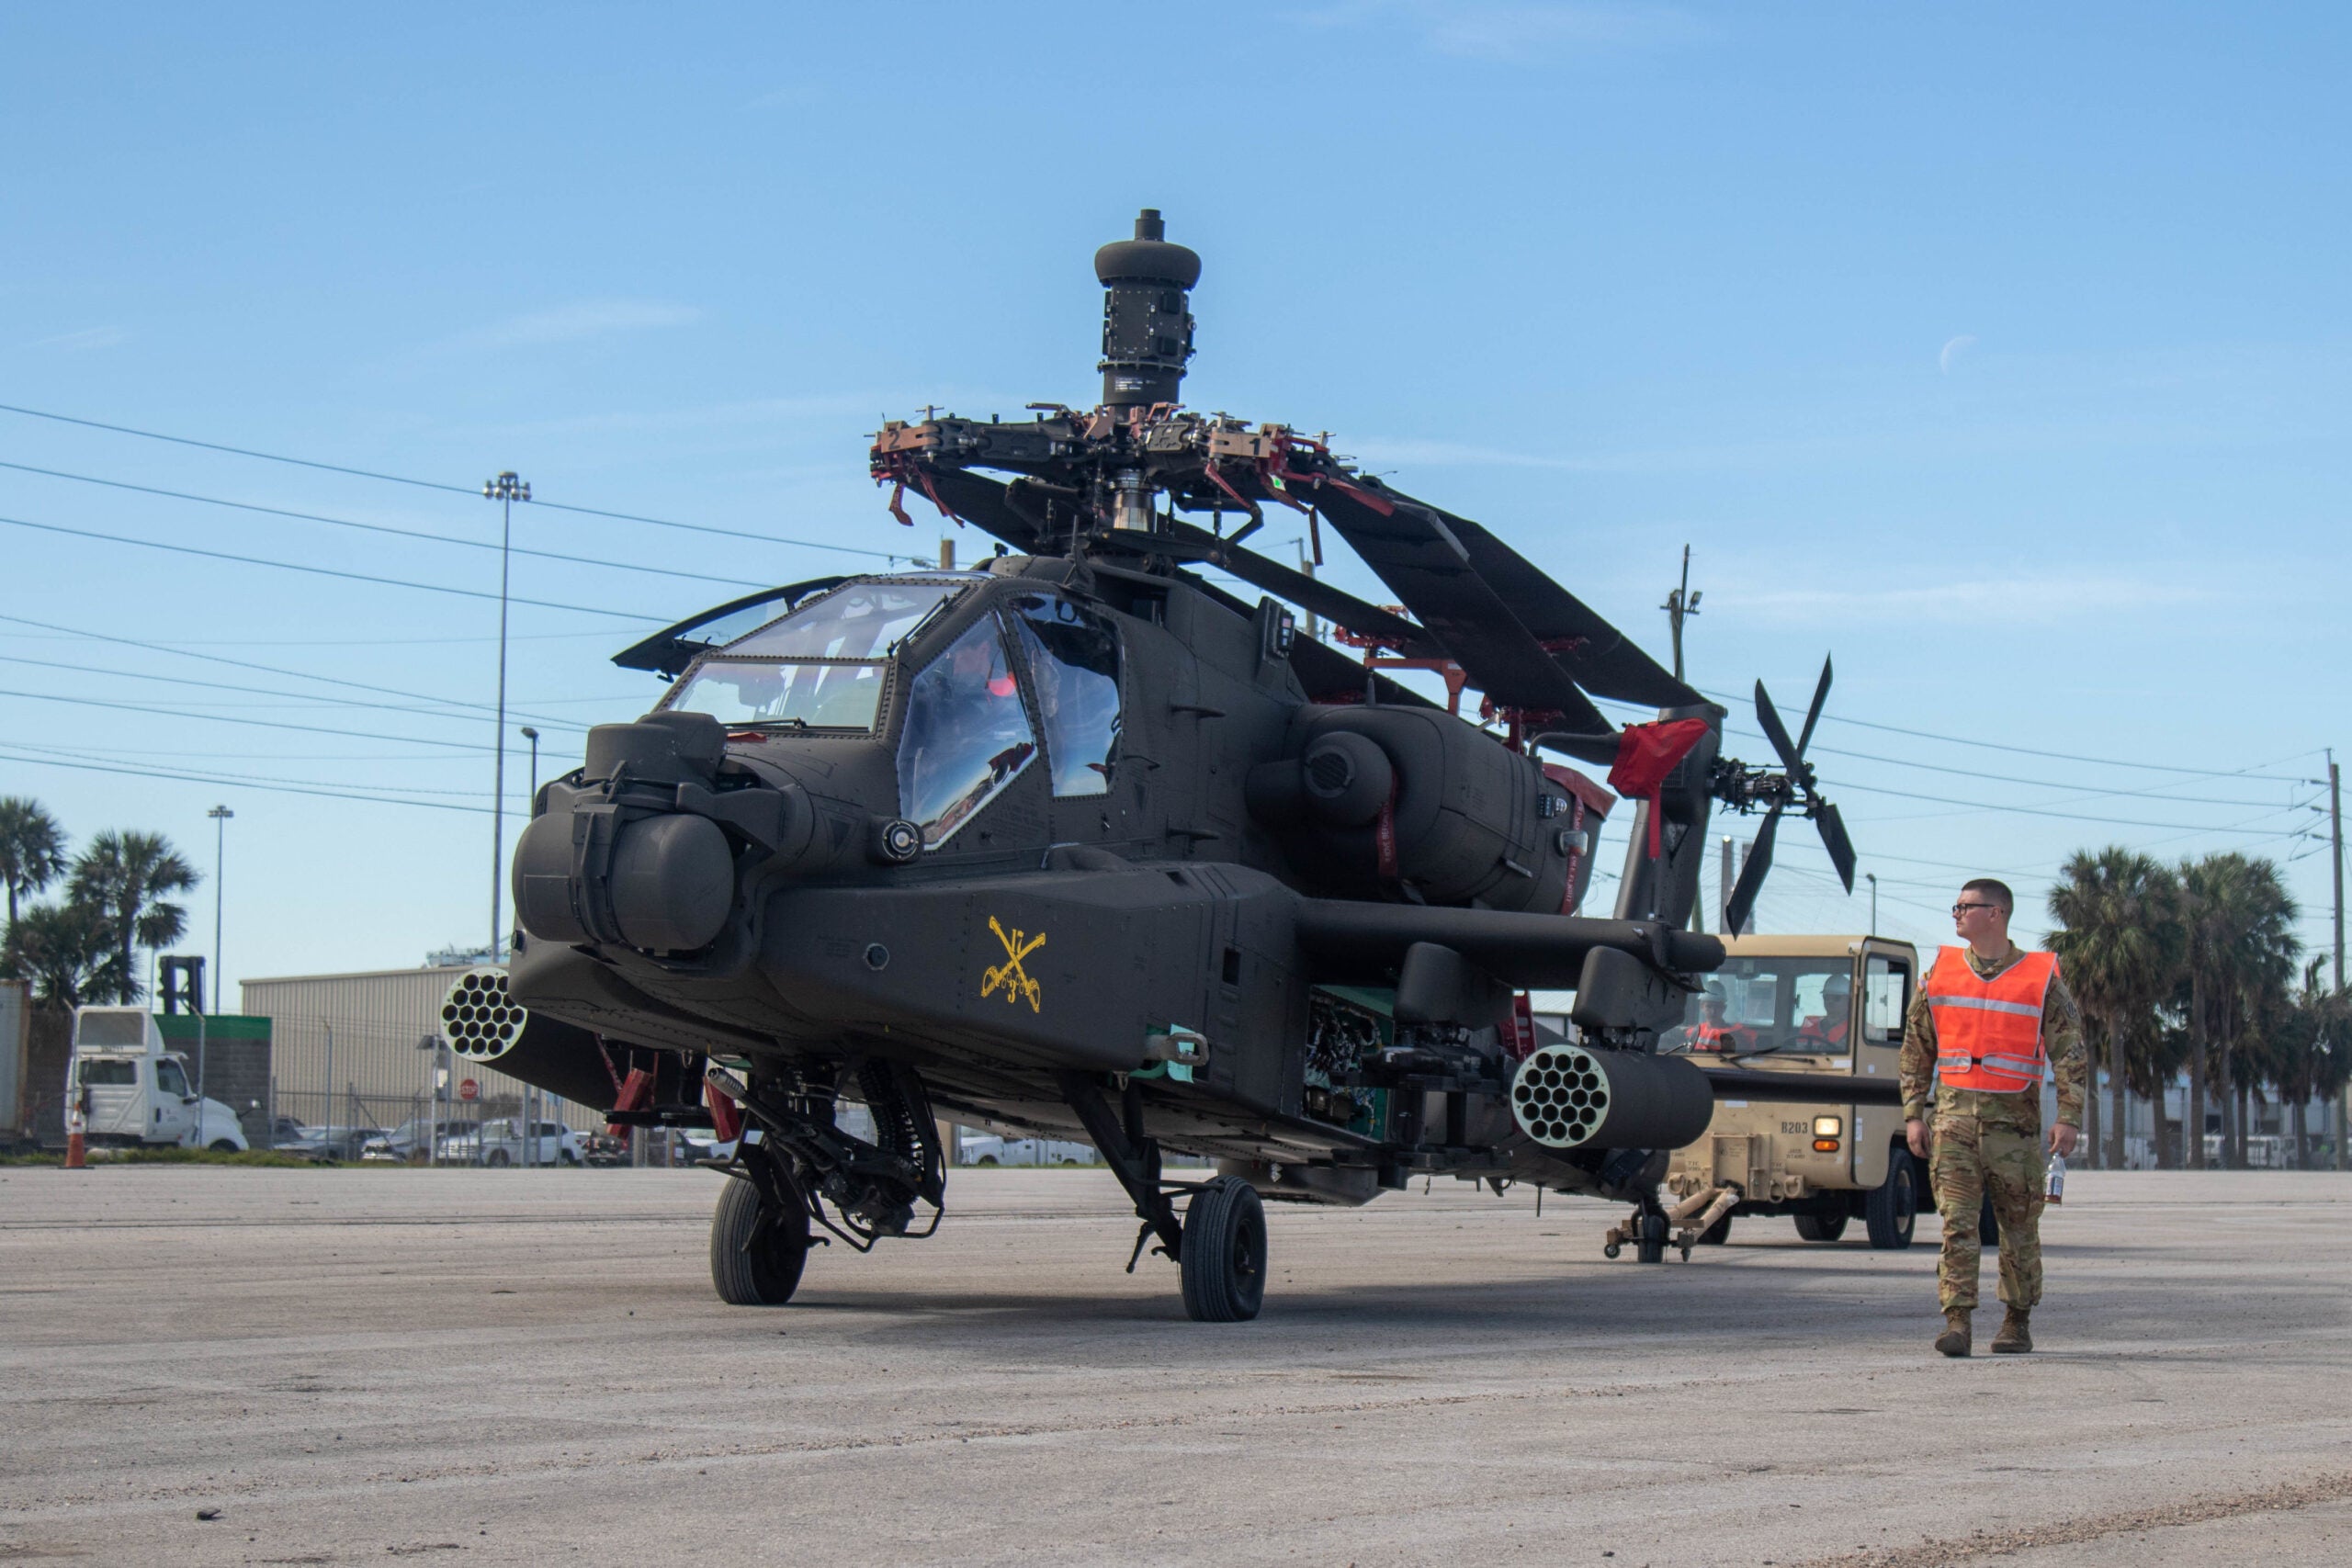 Soldiers assigned to the 3rd Combat Aviation Brigade, 3rd Infantry Division, move an AH-64 Apache to a staging area in the Jacksonville, Florida, port after folding the blades as part of port operations Feb. 14, 2023. 3rd CAB is preparing to support Atlantic Resolve, a nine-month rotation that provides rotational deployments of combat-credible forces to Europe to show our commitment to NATO while building readiness, increasing interoperability and enhancing the bonds between ally partner militaries (U.S. Army photo by Sgt Caitlin Wilkins, 3rd Combat Aviation Brigade)